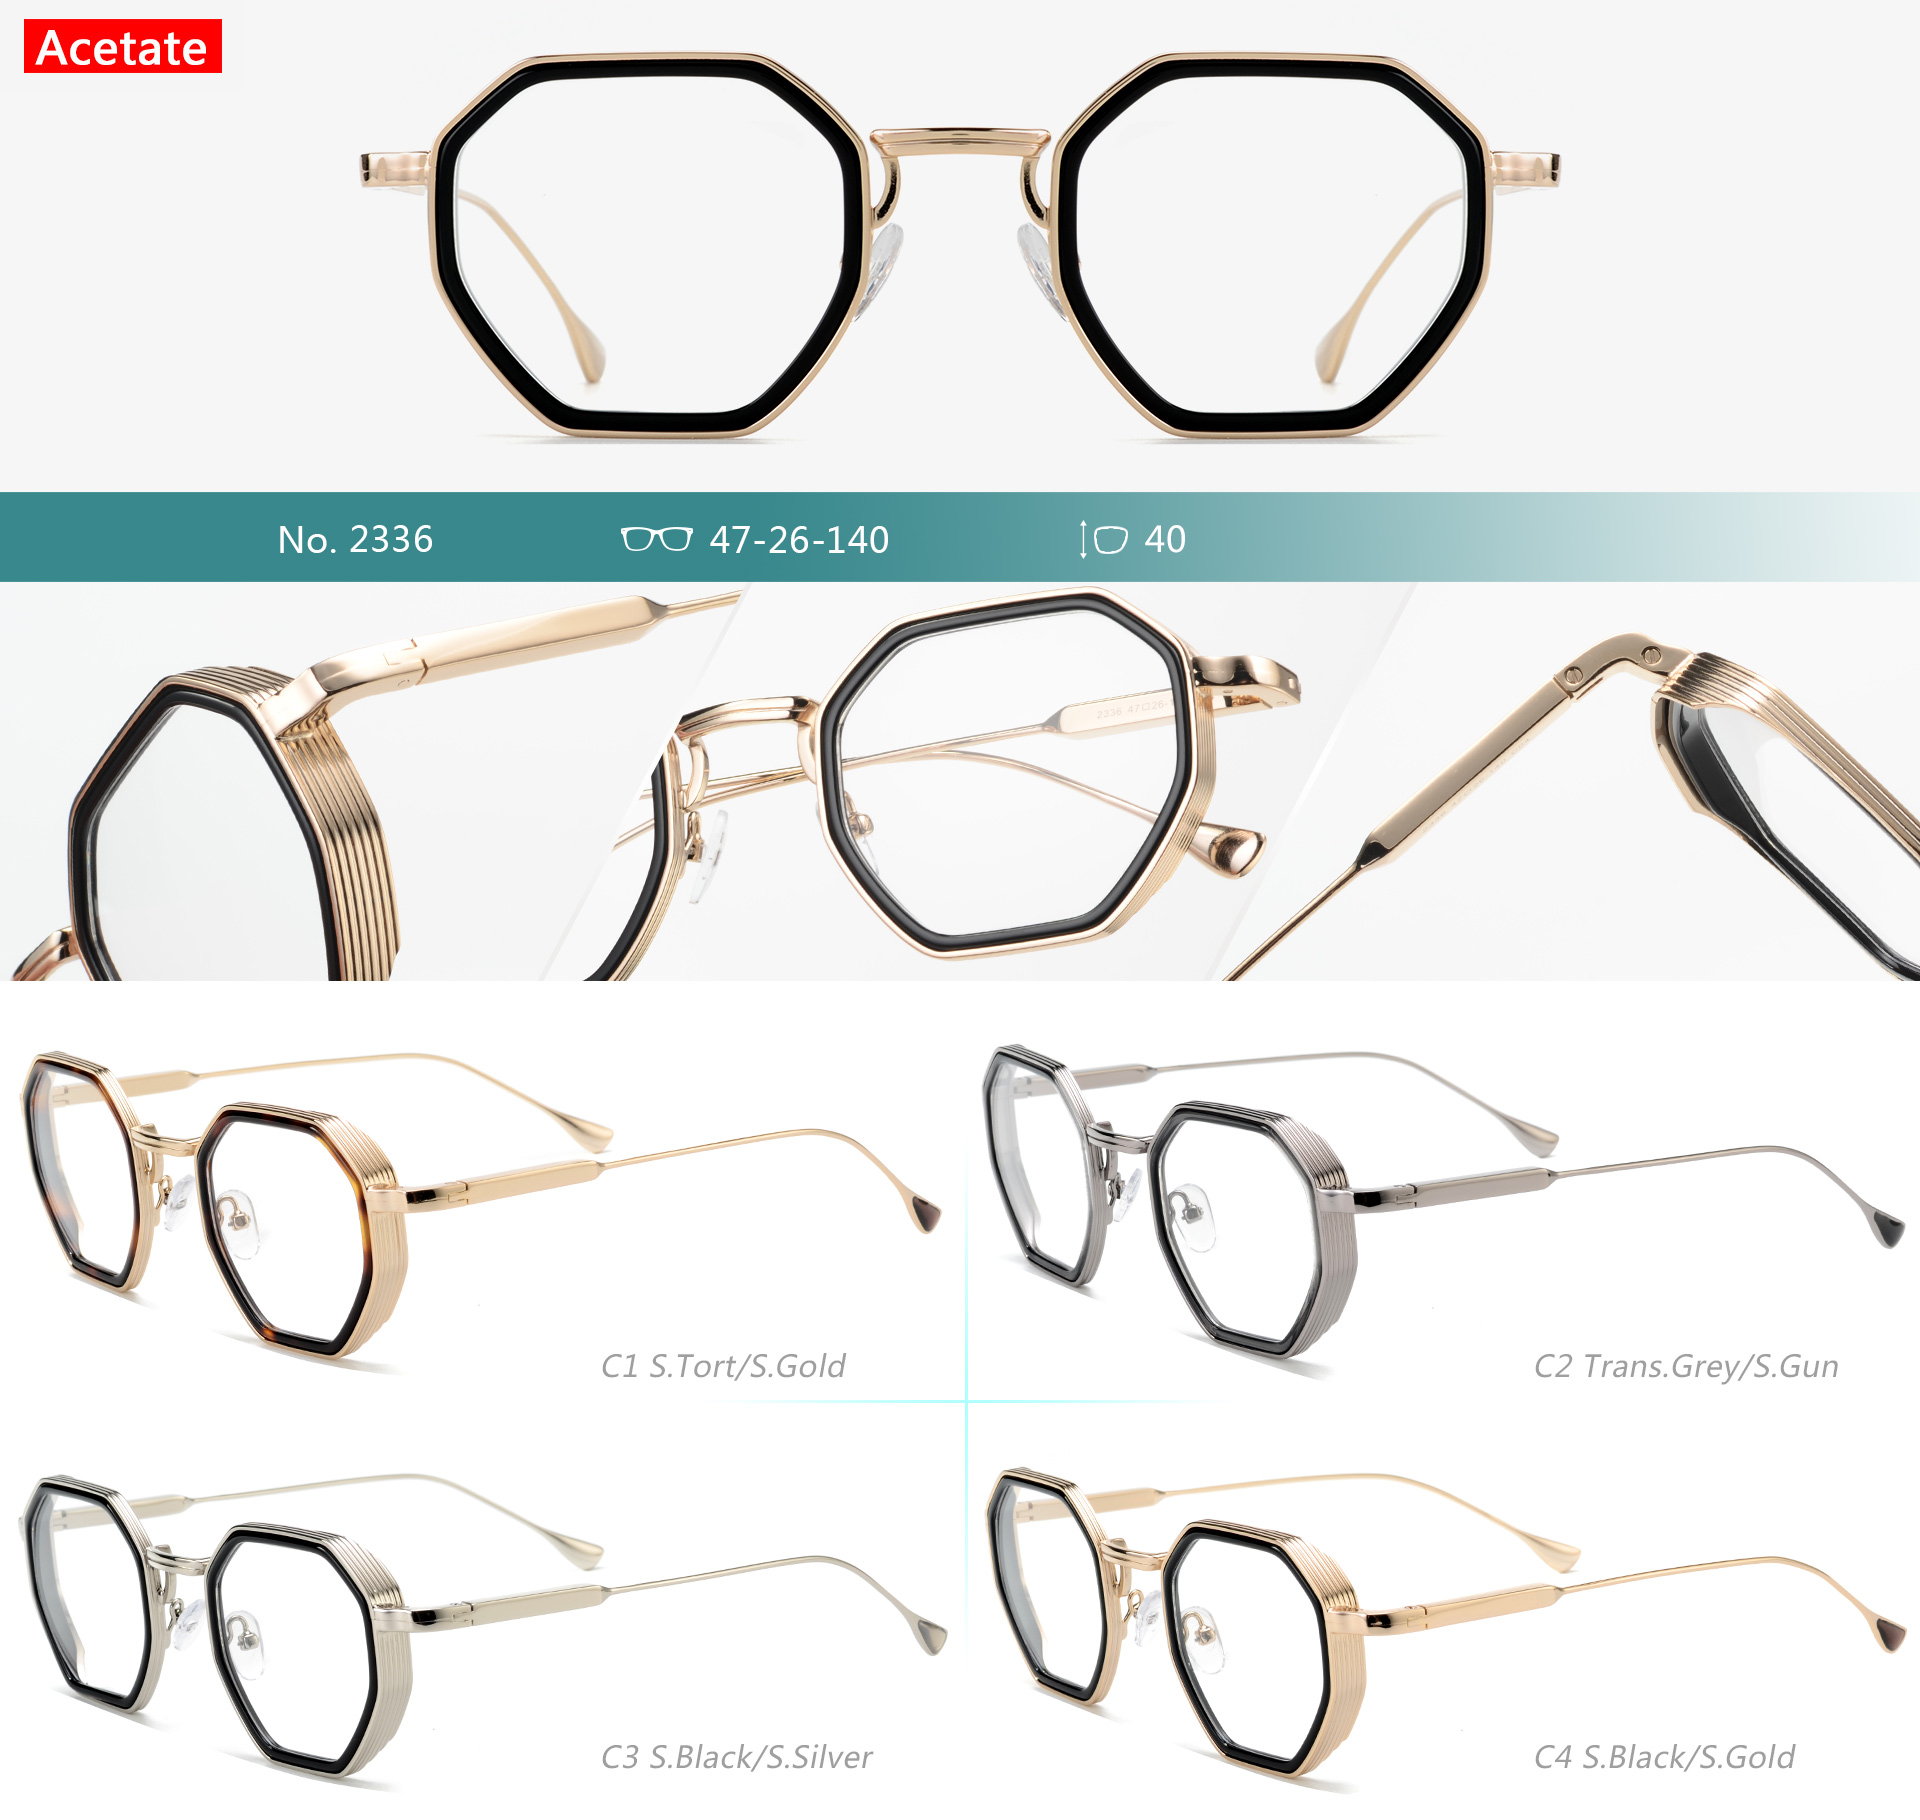 2023 SEP ACETATE NEW MODEL - 175 STYLES FOR YOUR COLLECTION